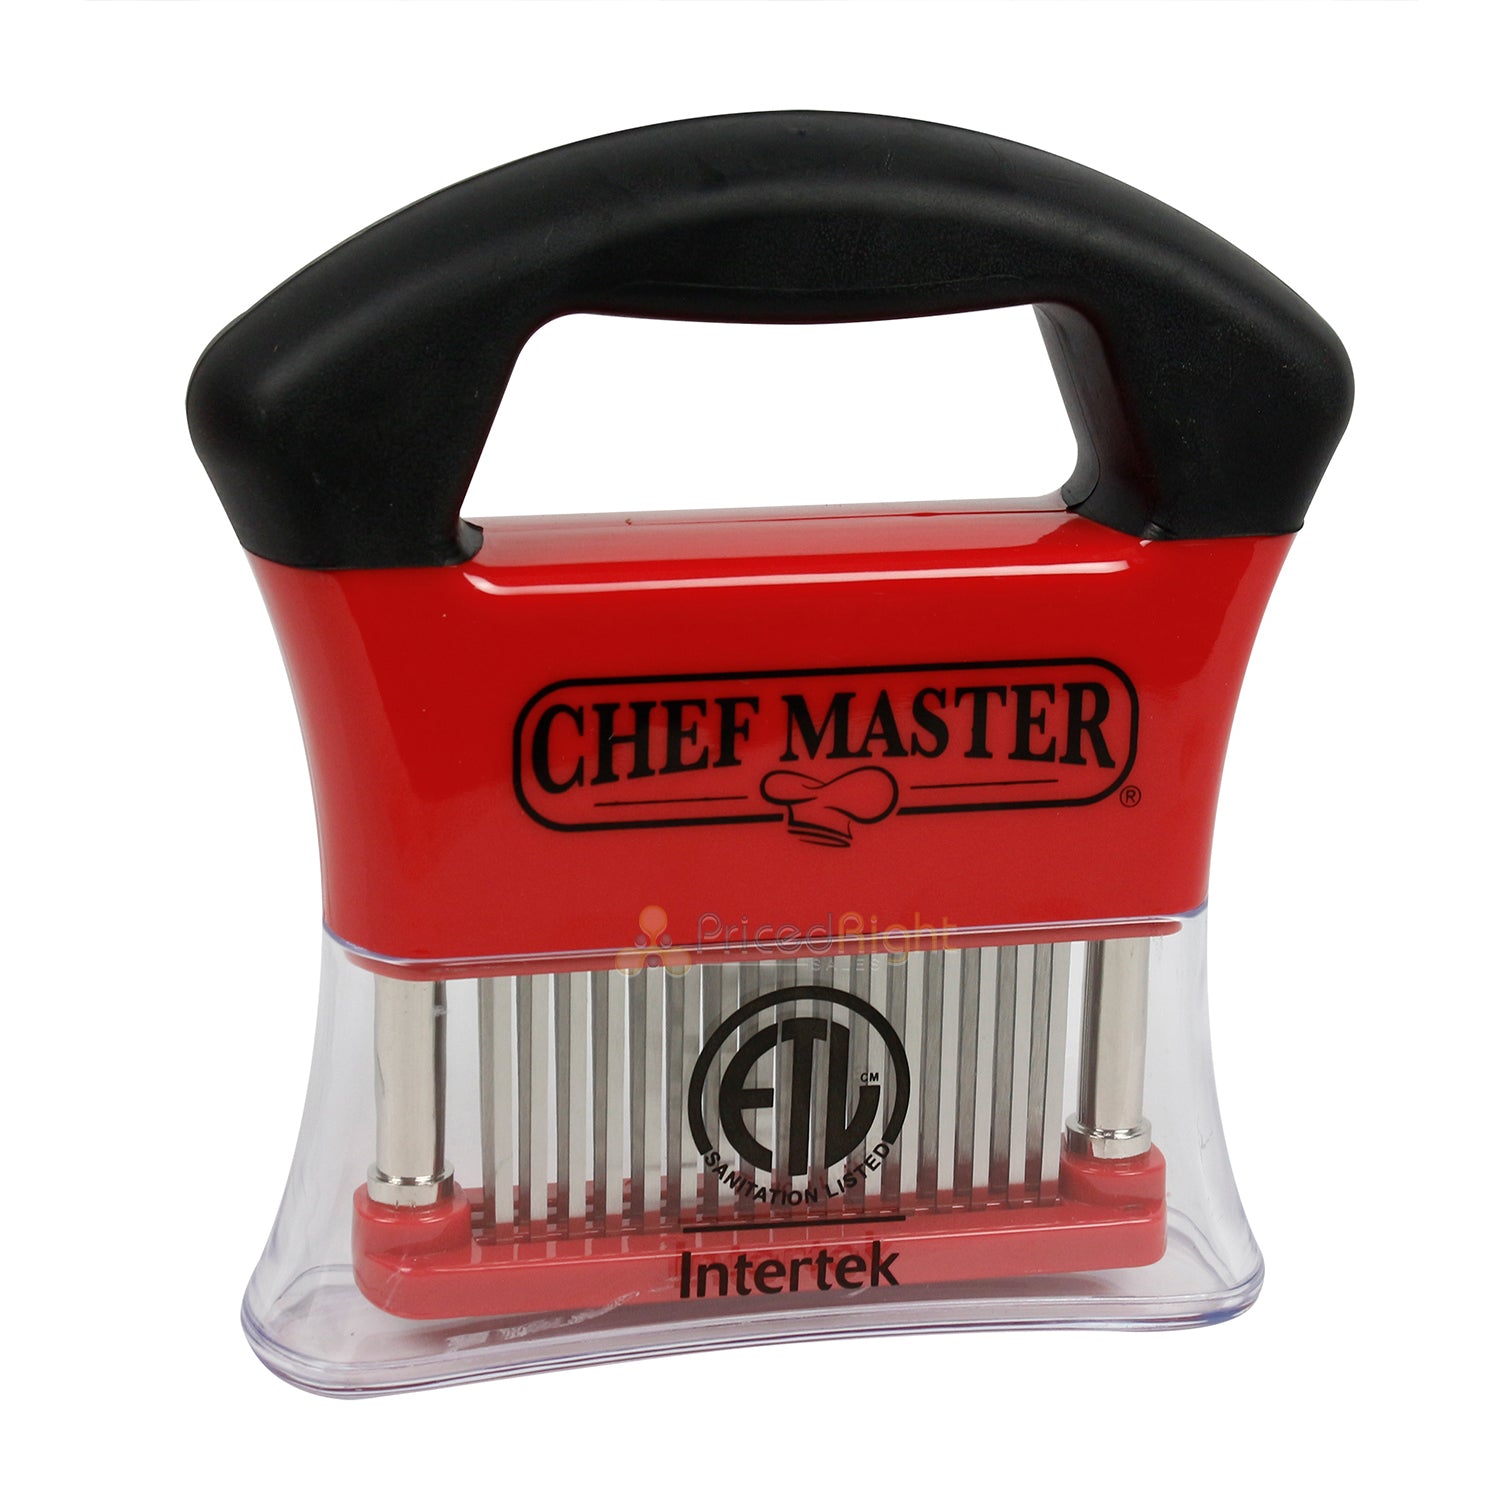 Chef Master Professional Meat Tenderizer W/ Stainless Steel Blades & Grip Handle